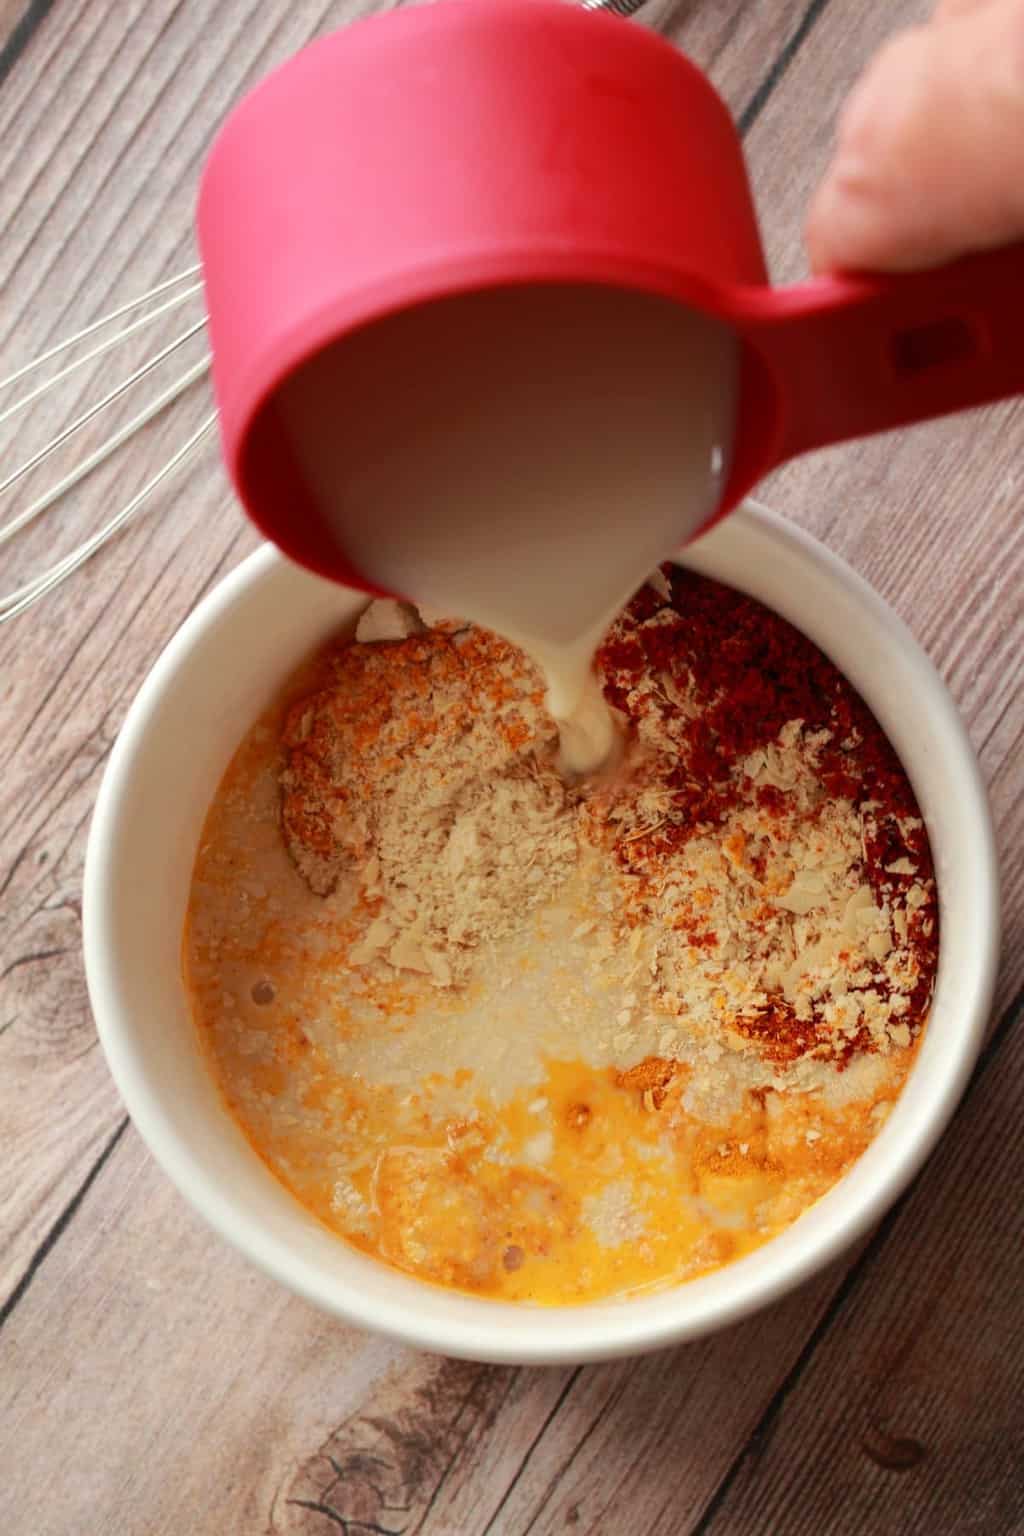 Pouring soy milk into a bowl with spices. 